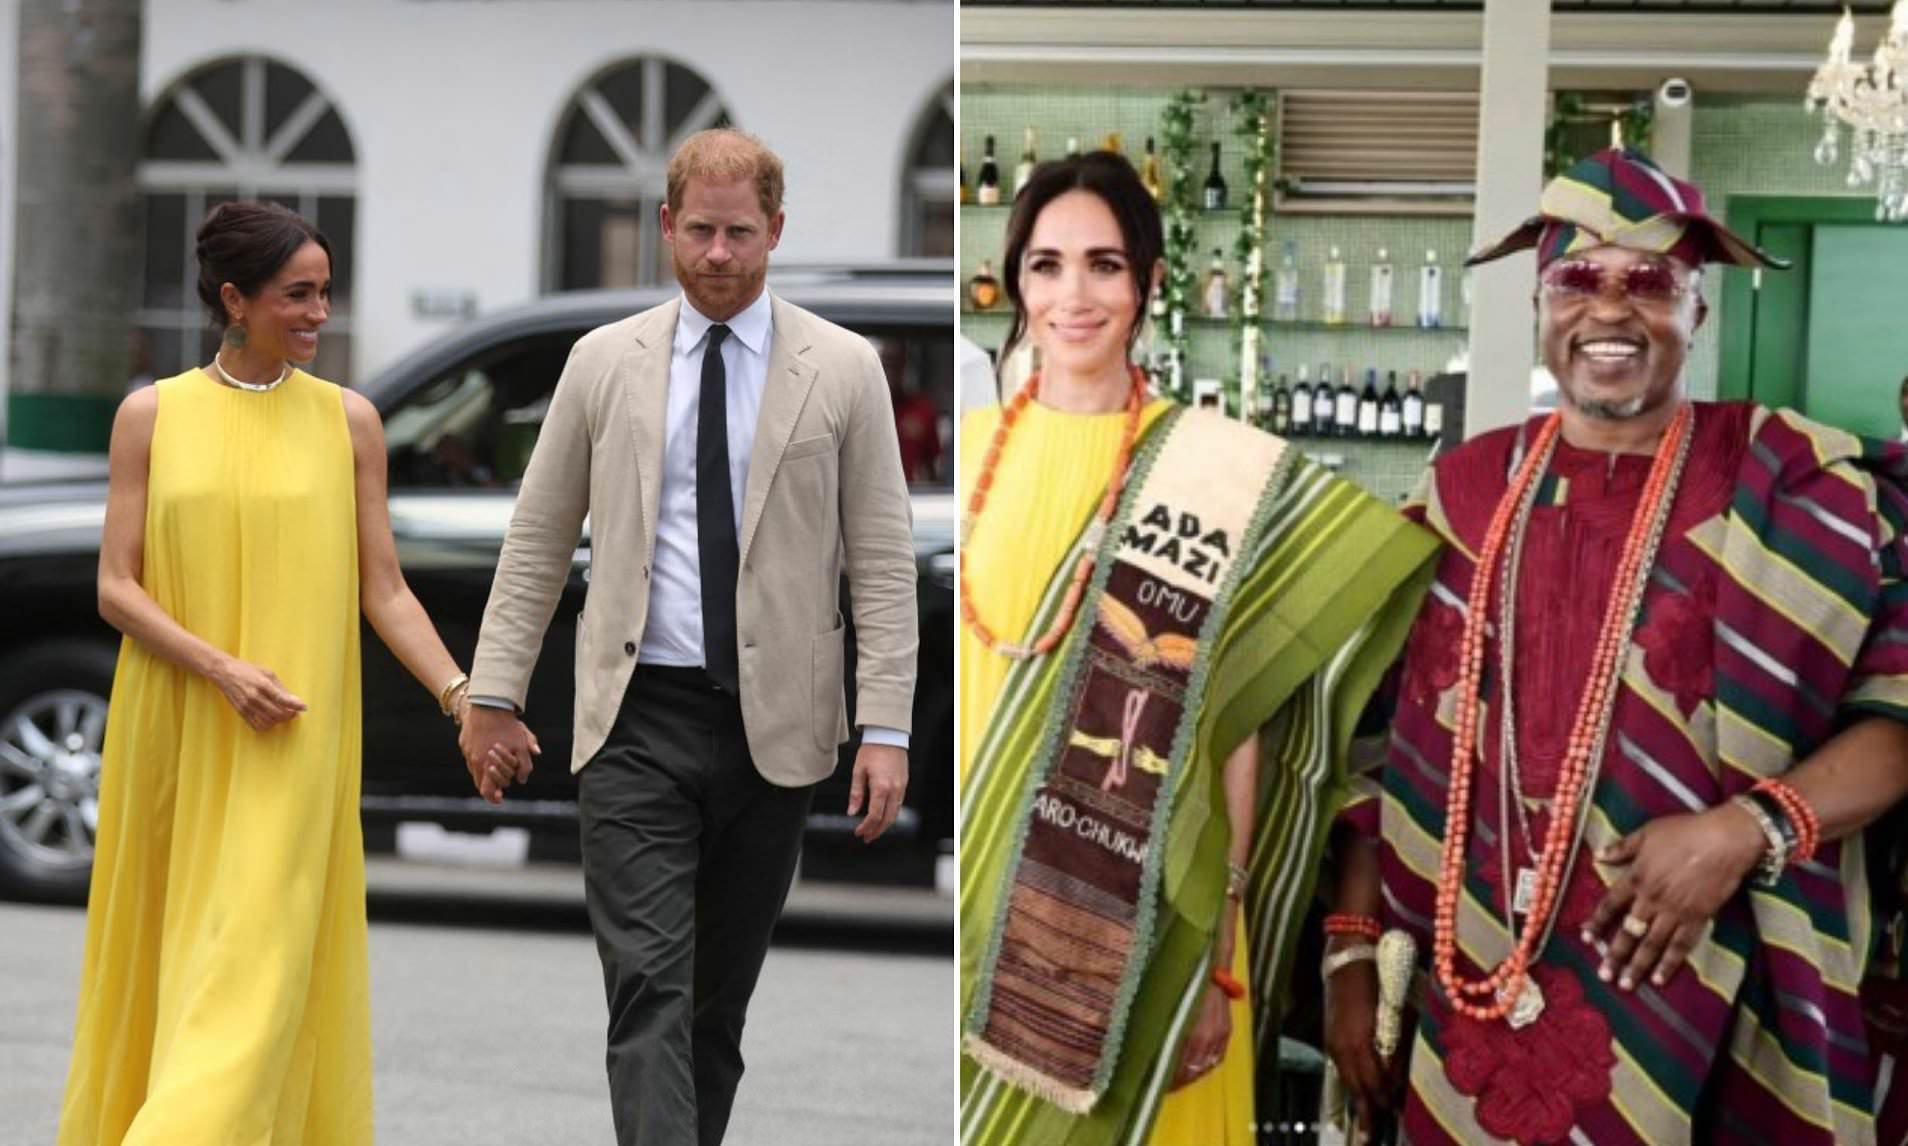 Meghan Markle sparks controversy for embracing Nigerian heritage with new title: Meghan Markle receives new title 'Adetokunbo' by Yoruba King in Nigeria after recent visit; check out the meaning